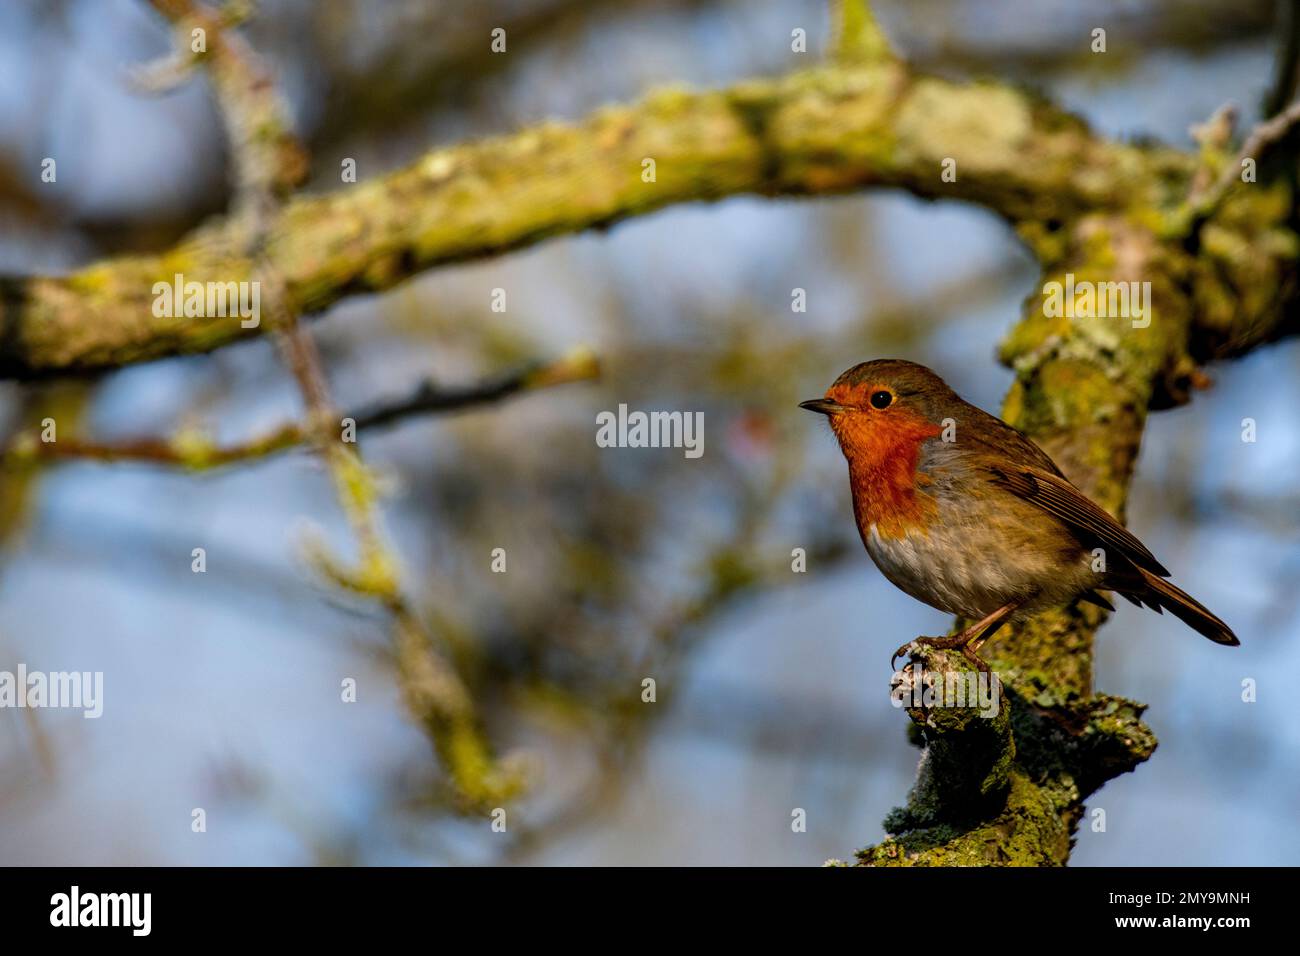 A robin red breast on a branch in a London park Stock Photo